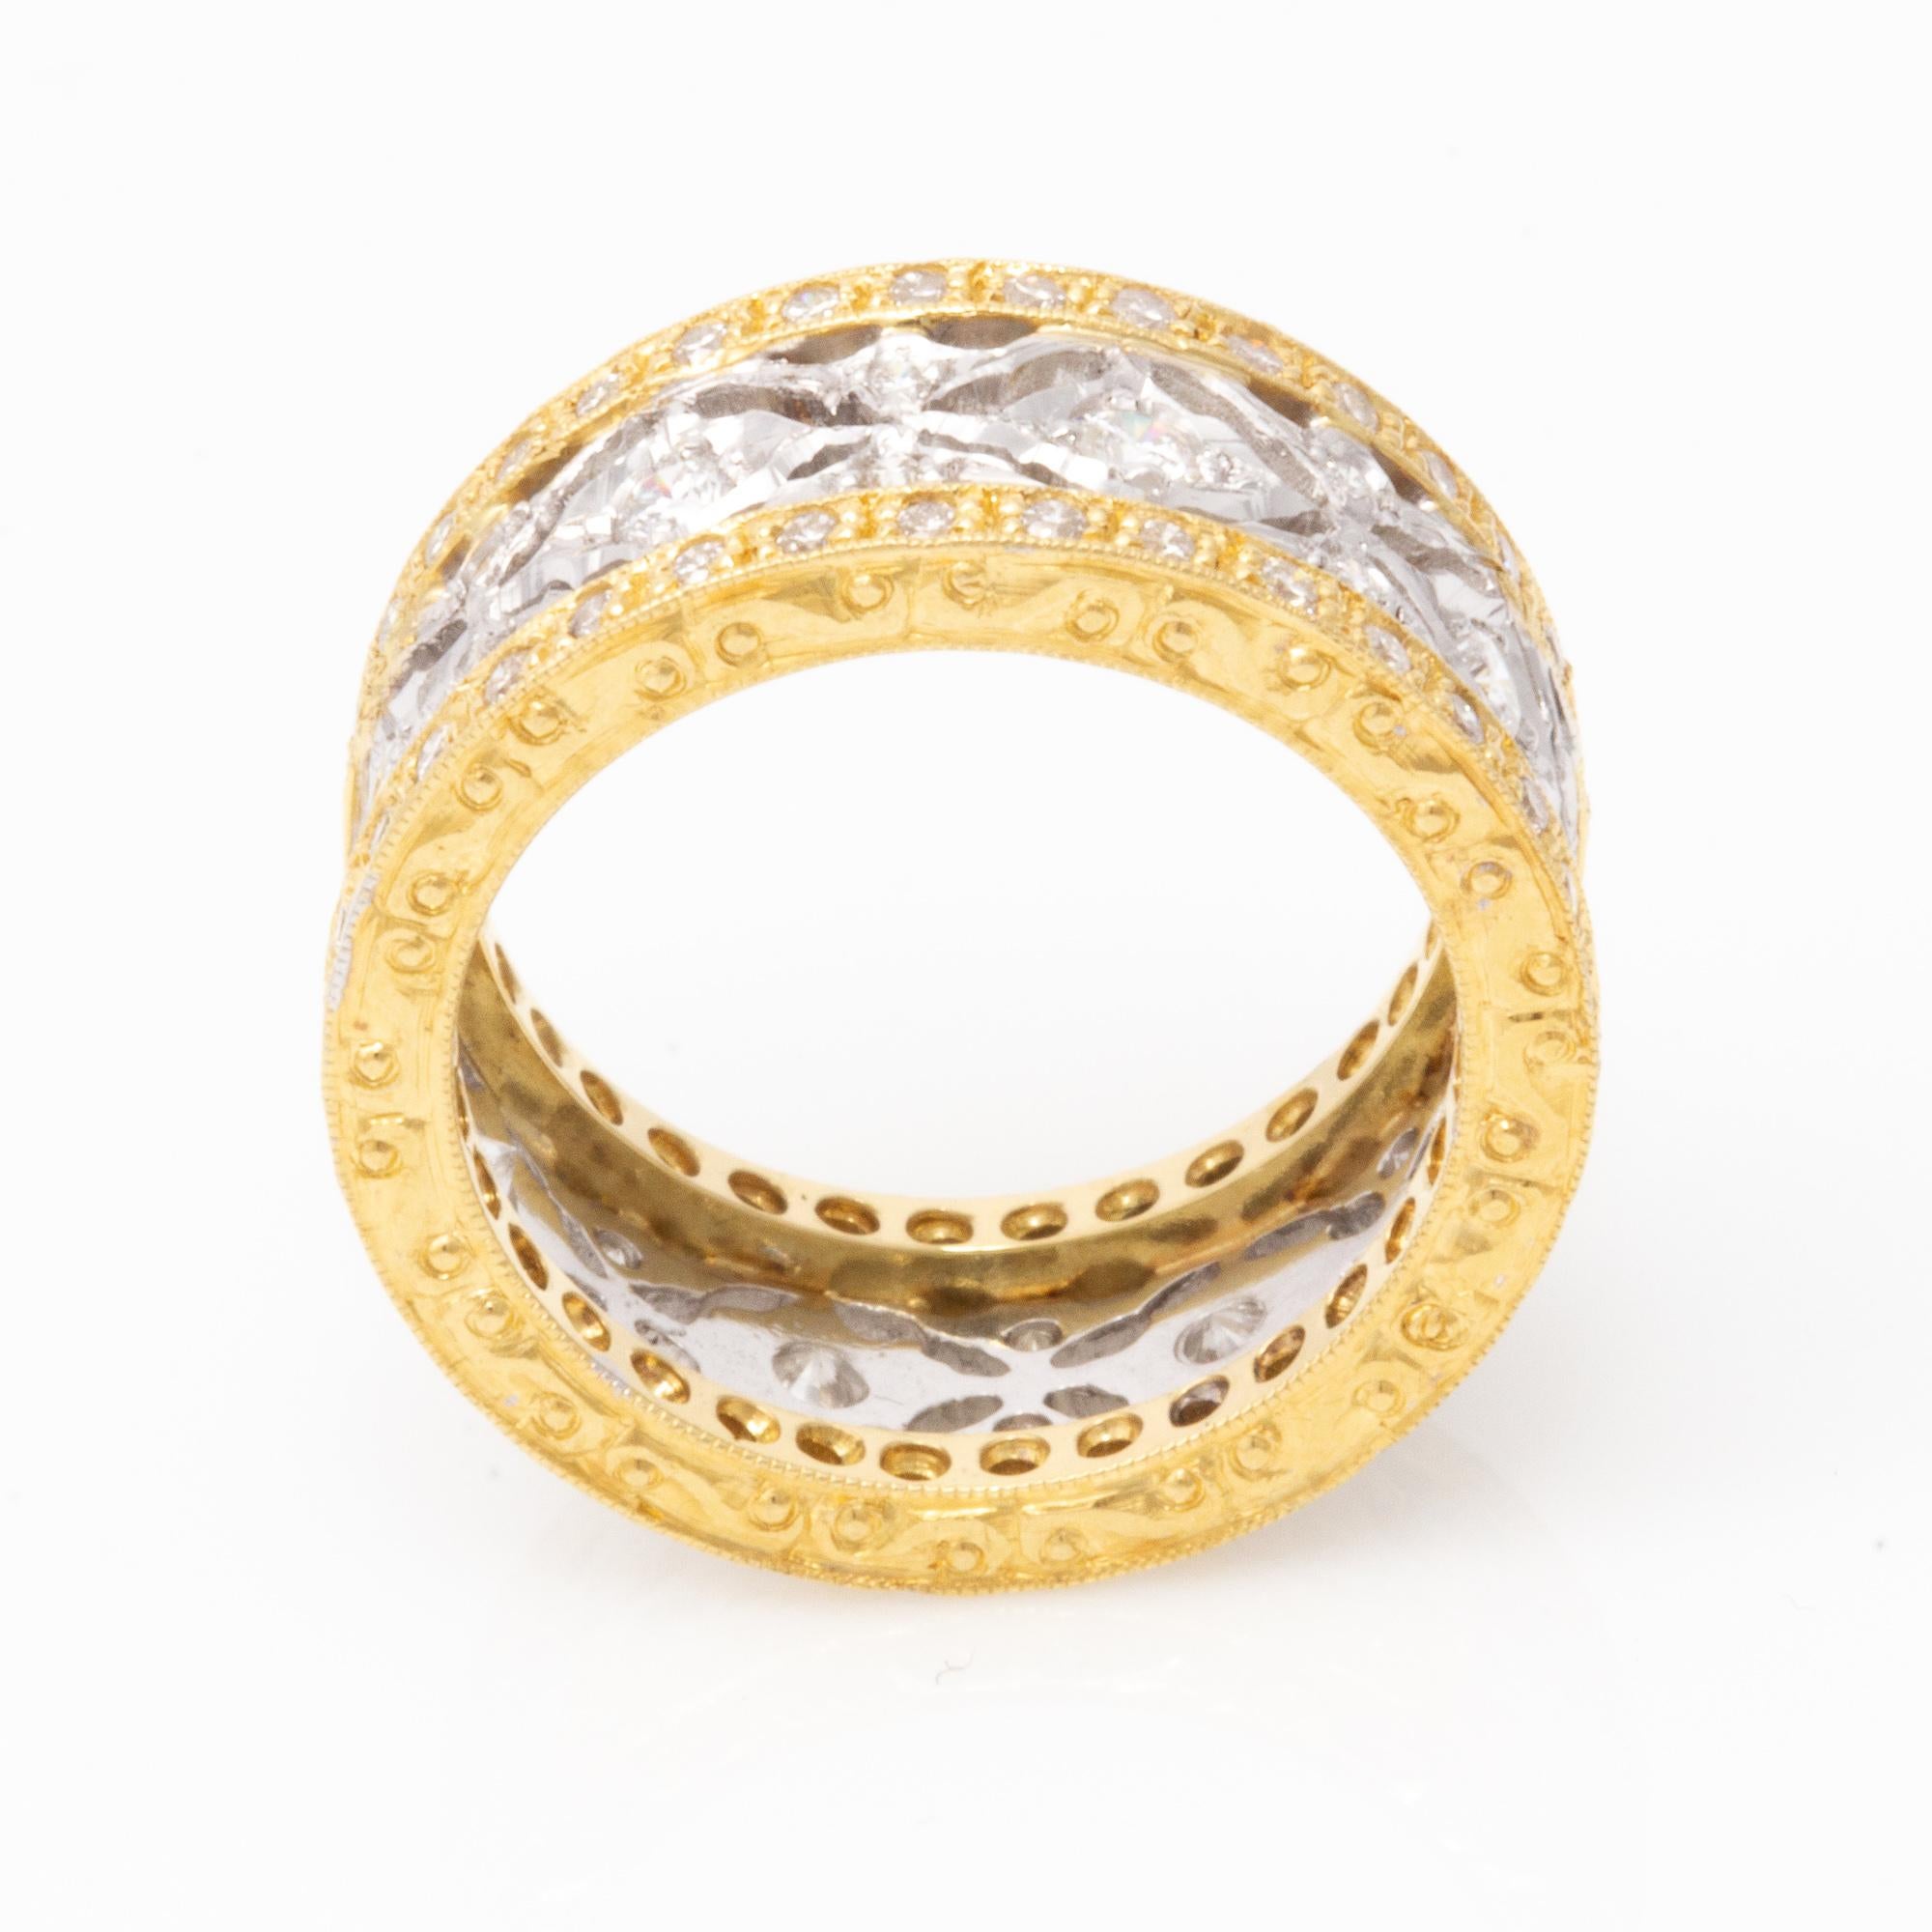 Hand-Engraved Two-Tone 18 Karat Gold and Diamond Ring For Sale 3